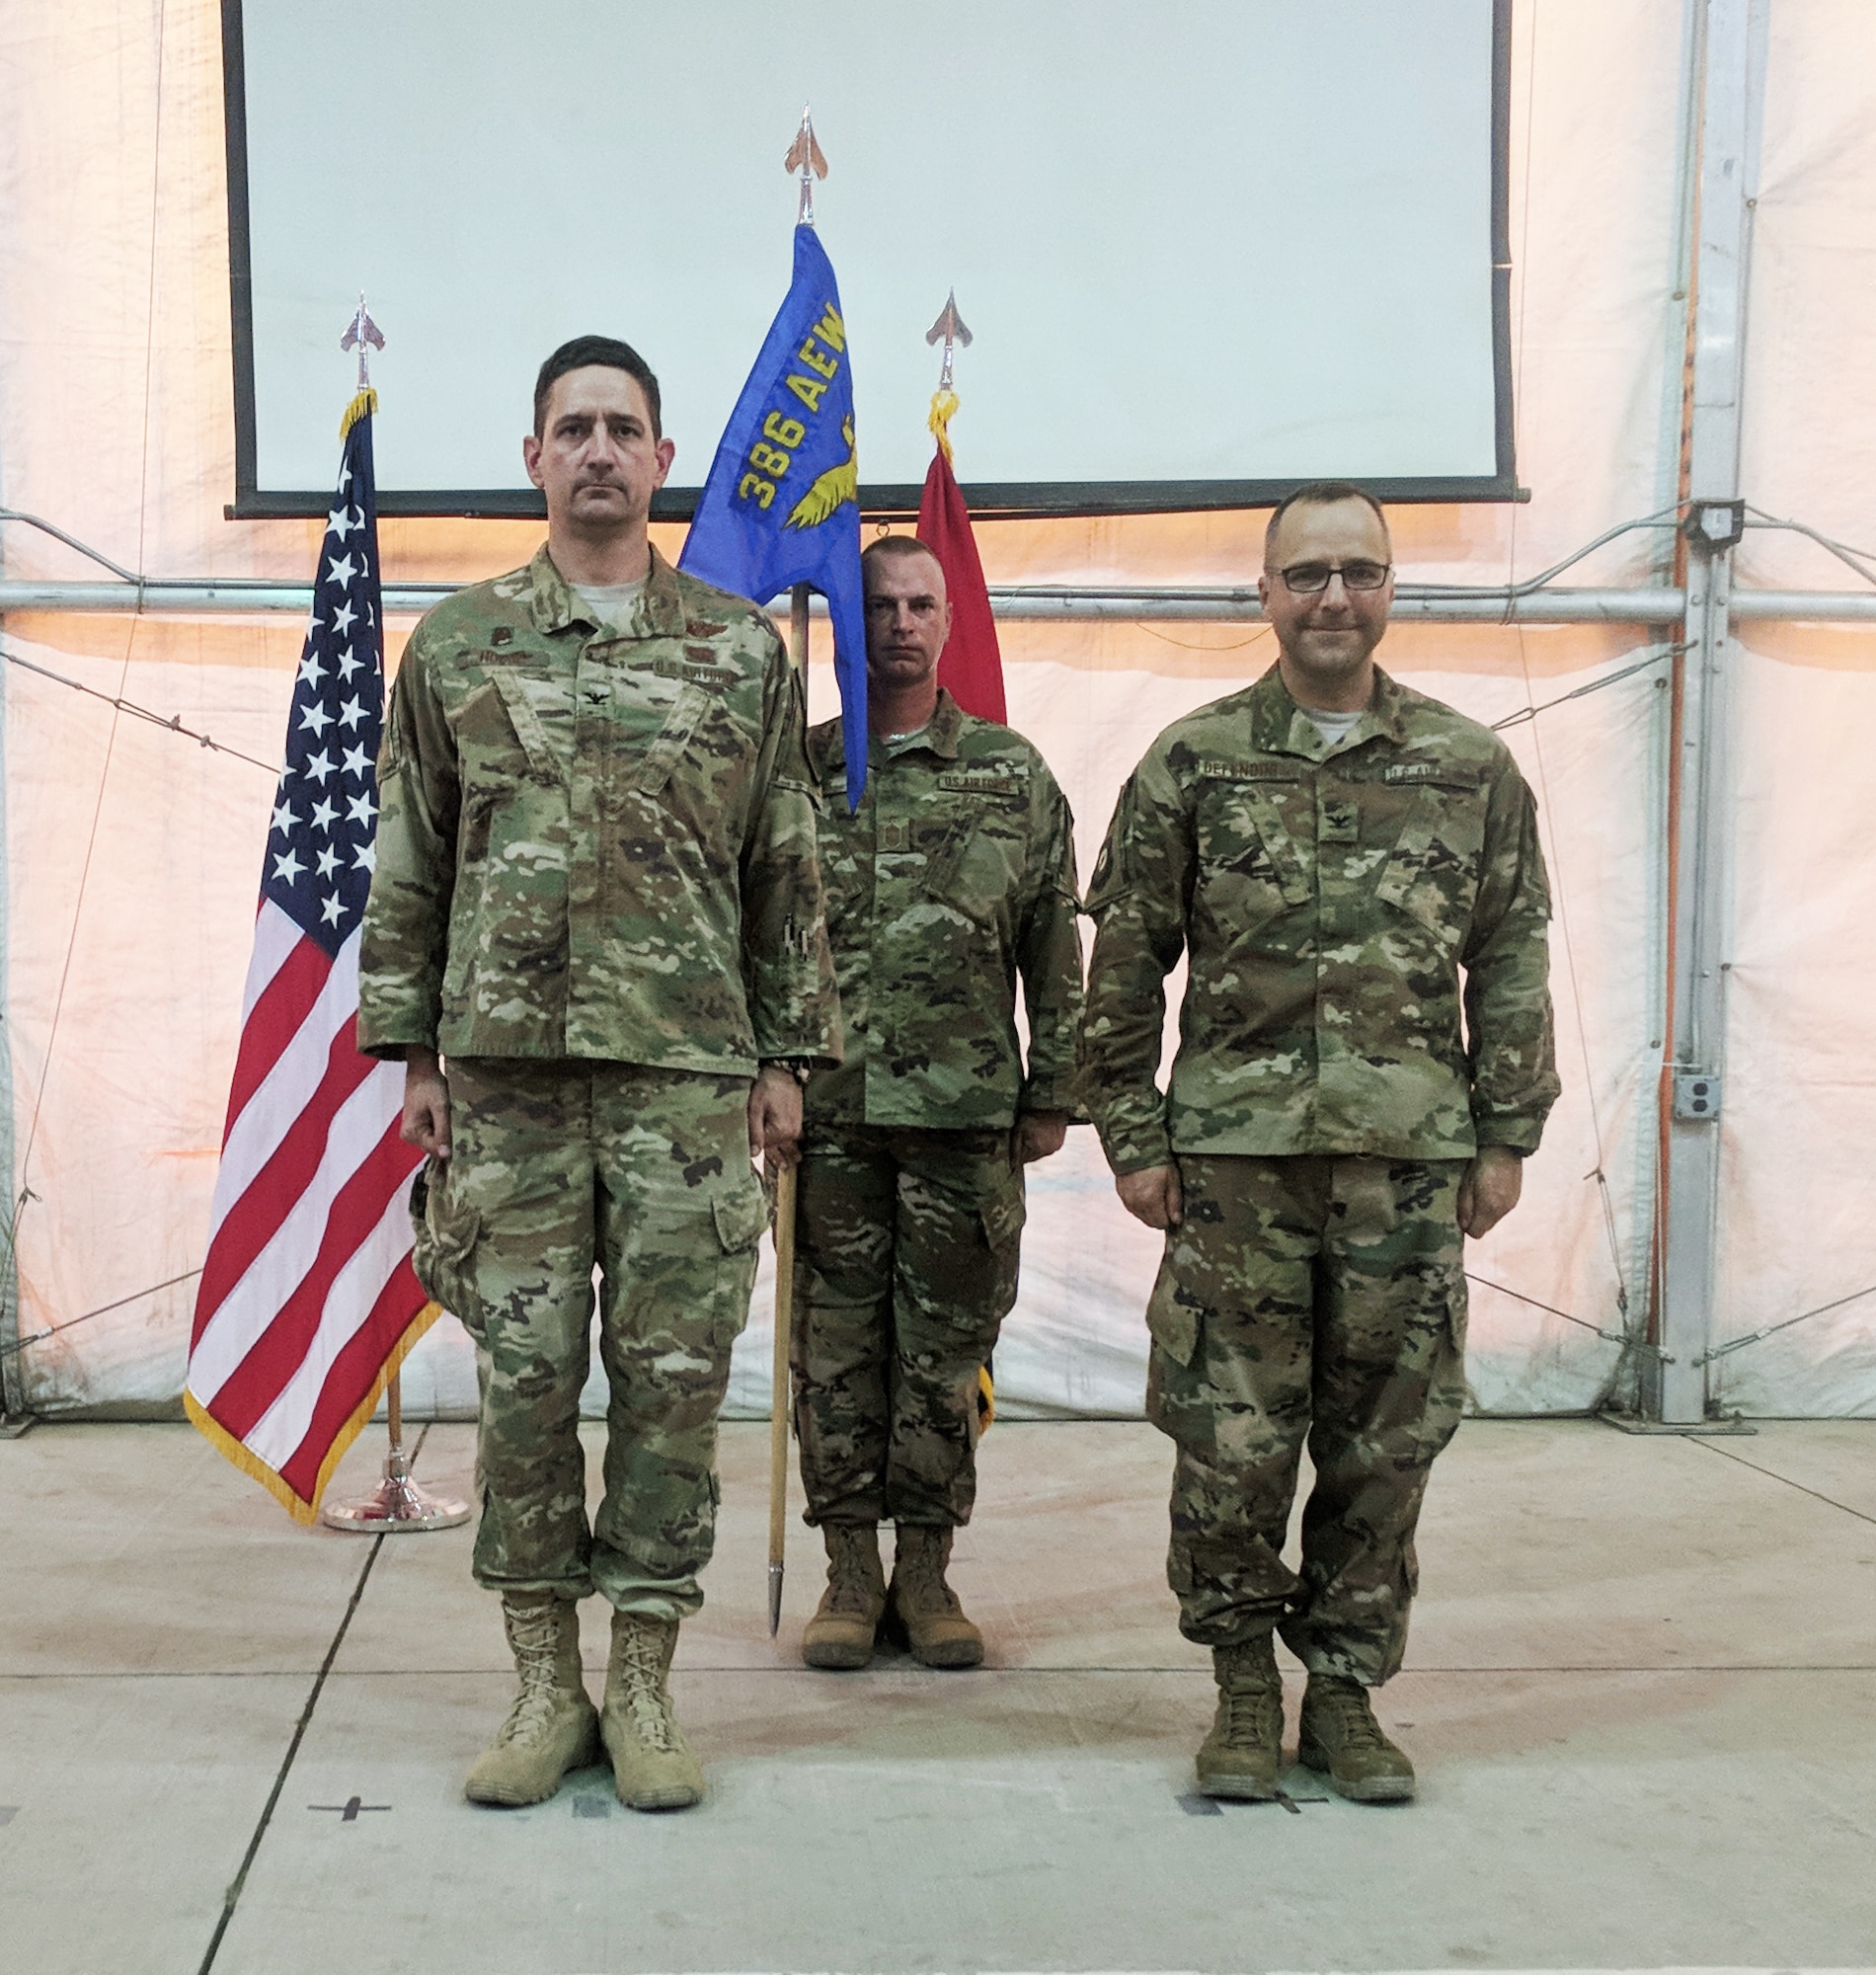 Col. Stephen Hodge, the Commander of the 386th Air Expeditionary Wing, Chief Todd, Command Chief of the 370th Air Expeditionary Advisory Group, and Col. Eduardo Defendini, Commander of the 370th AEAG, stand at attention during the assumption of command ceremony in Baghdad, Iraq, July 5. Defendini was previously assigned as the chief of NATO Alliance Ground Forces Operations in Belgium. (Courtesy photo)